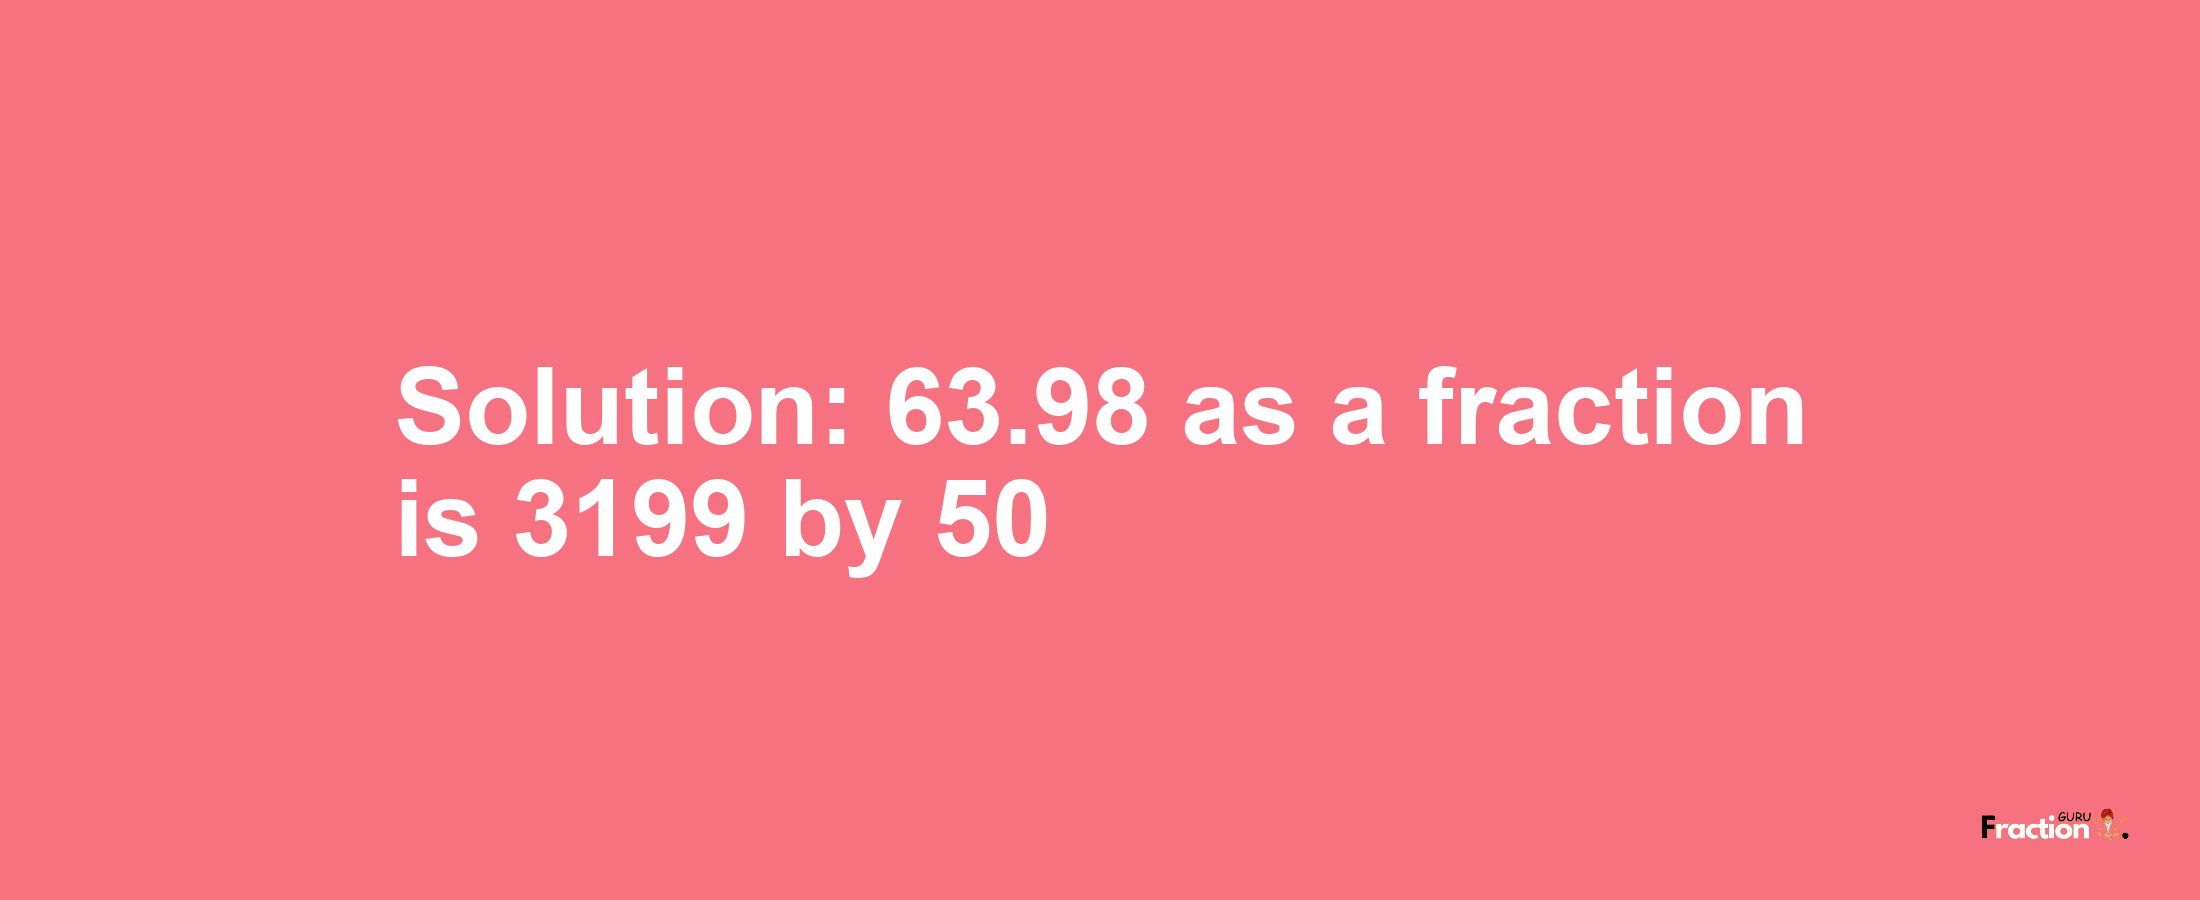 Solution:63.98 as a fraction is 3199/50